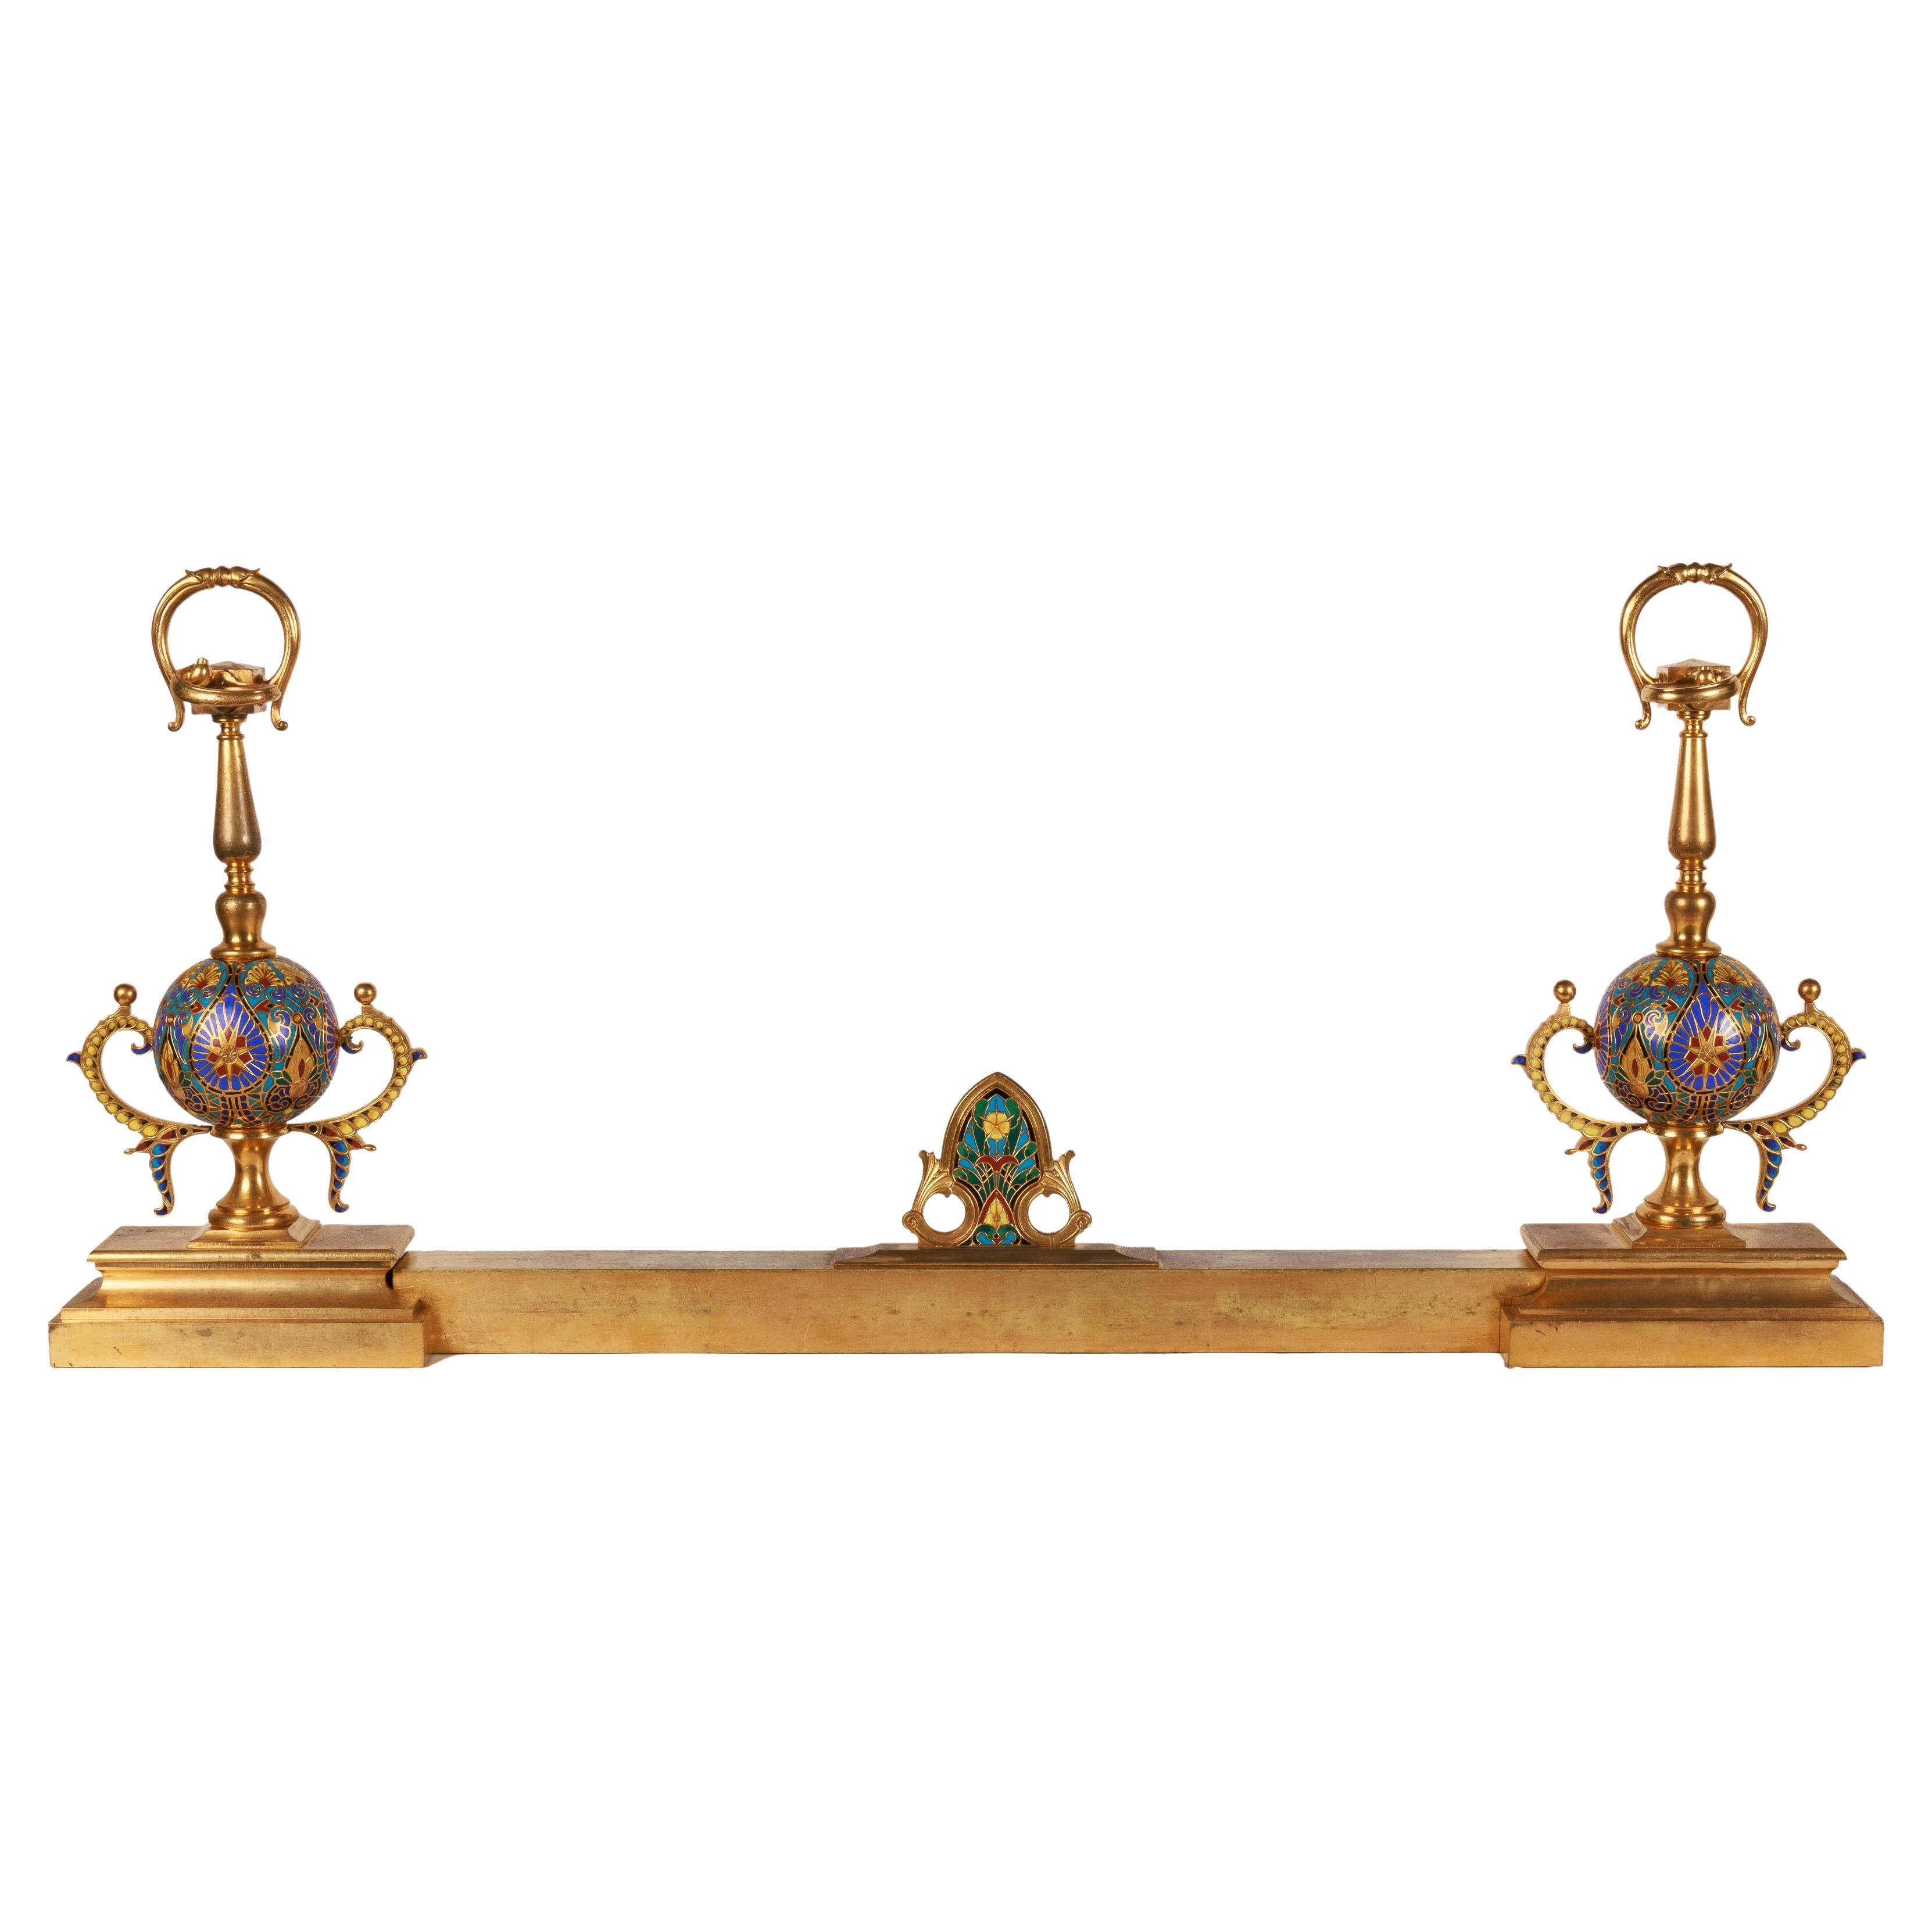 Ferdinand Barbedienne, A Pair of French Ormolu and Champleve Enamel Andirons, Chenets, circa 1870.

A rare and unusual pair of bronze and multi-colored champleve enameled andirons / chenets. Perfect for any tasteful fireplace. 

Signed F.